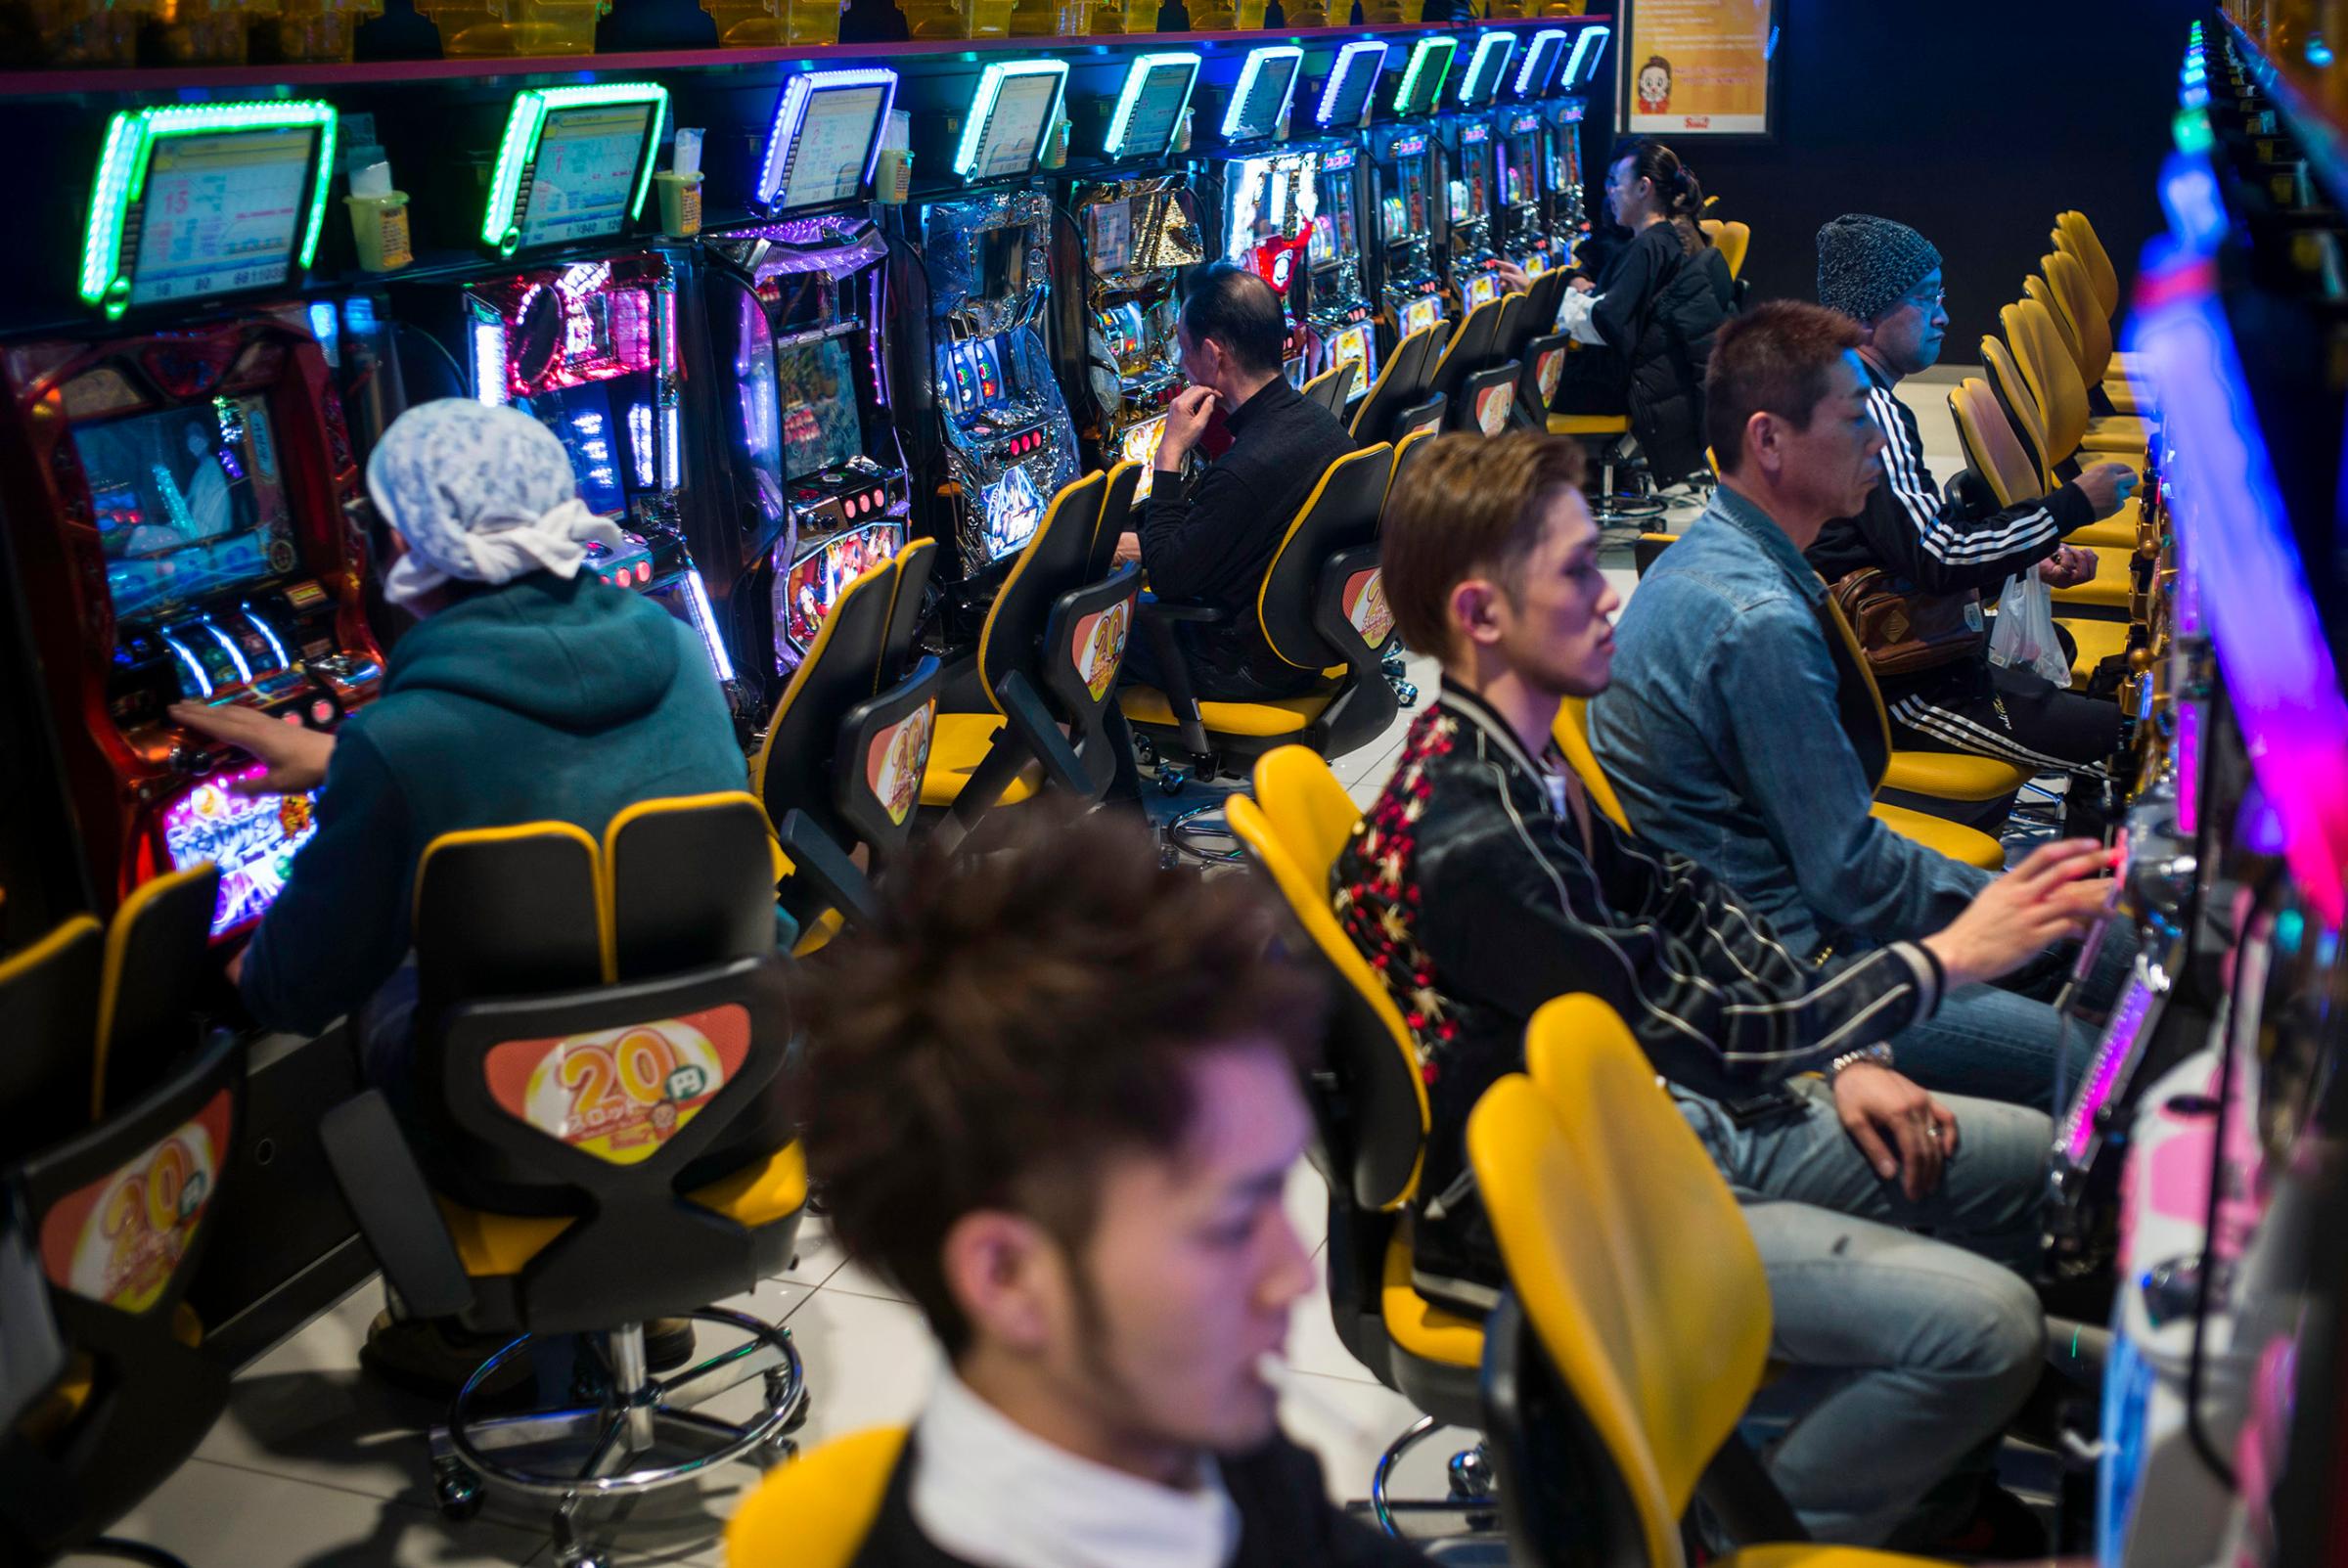 Yuki Mine, a 34-year-old part-time hairdresser and bartender, and other Minamisoma residents enjoy legal gambling in one of the many slot machine arcades, March 6, 2016. Several arcades have opened up in this region due to the high number of decontamination and other workers that have flocked to the town, as well as many residents who have received large amounts of compensation.